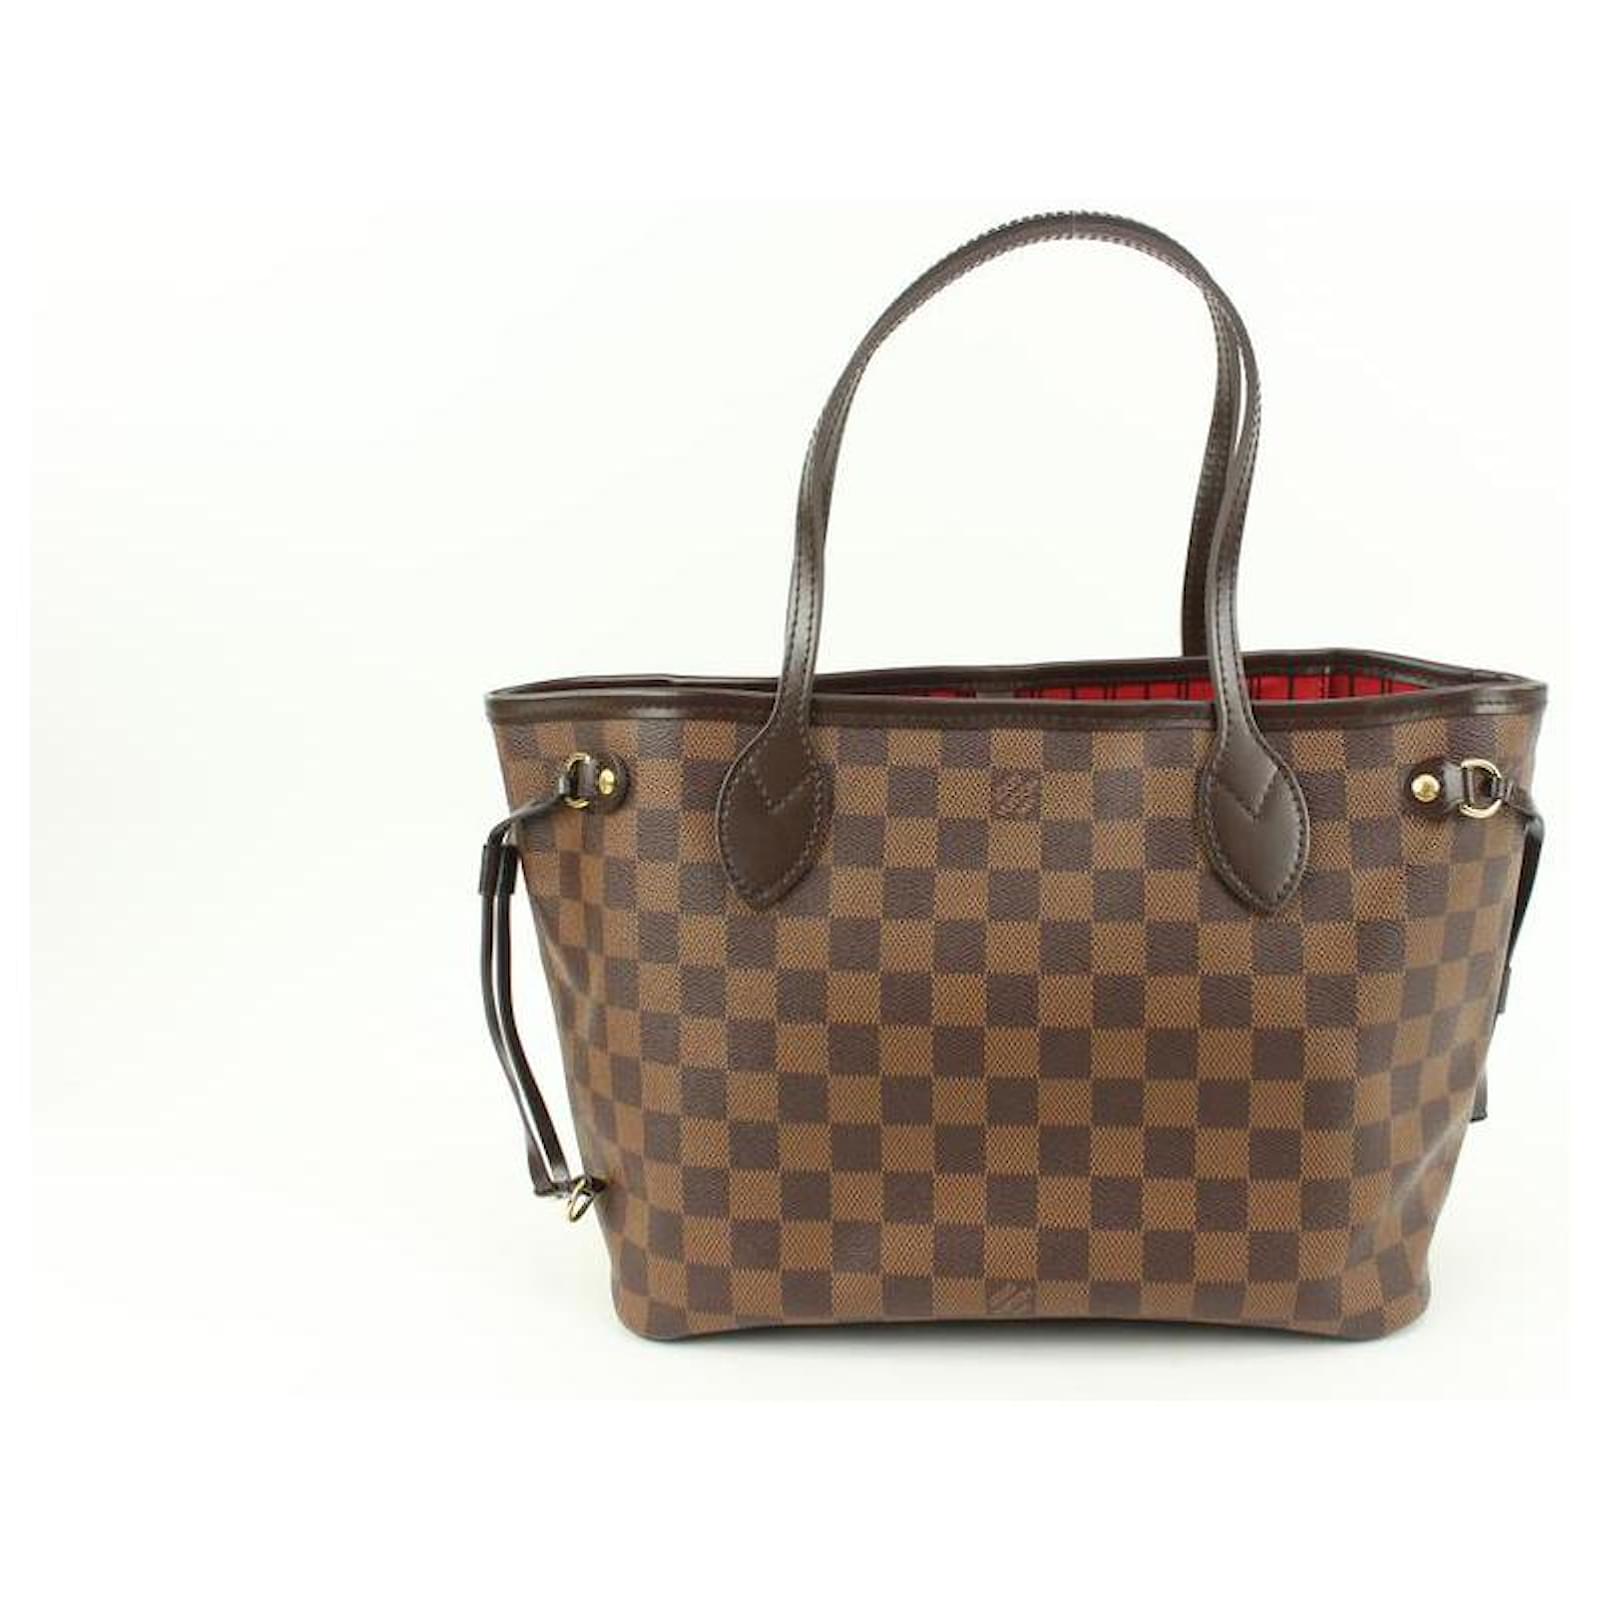 Louis Vuitton Small Damier Azur Neverfull PM Tote Bag